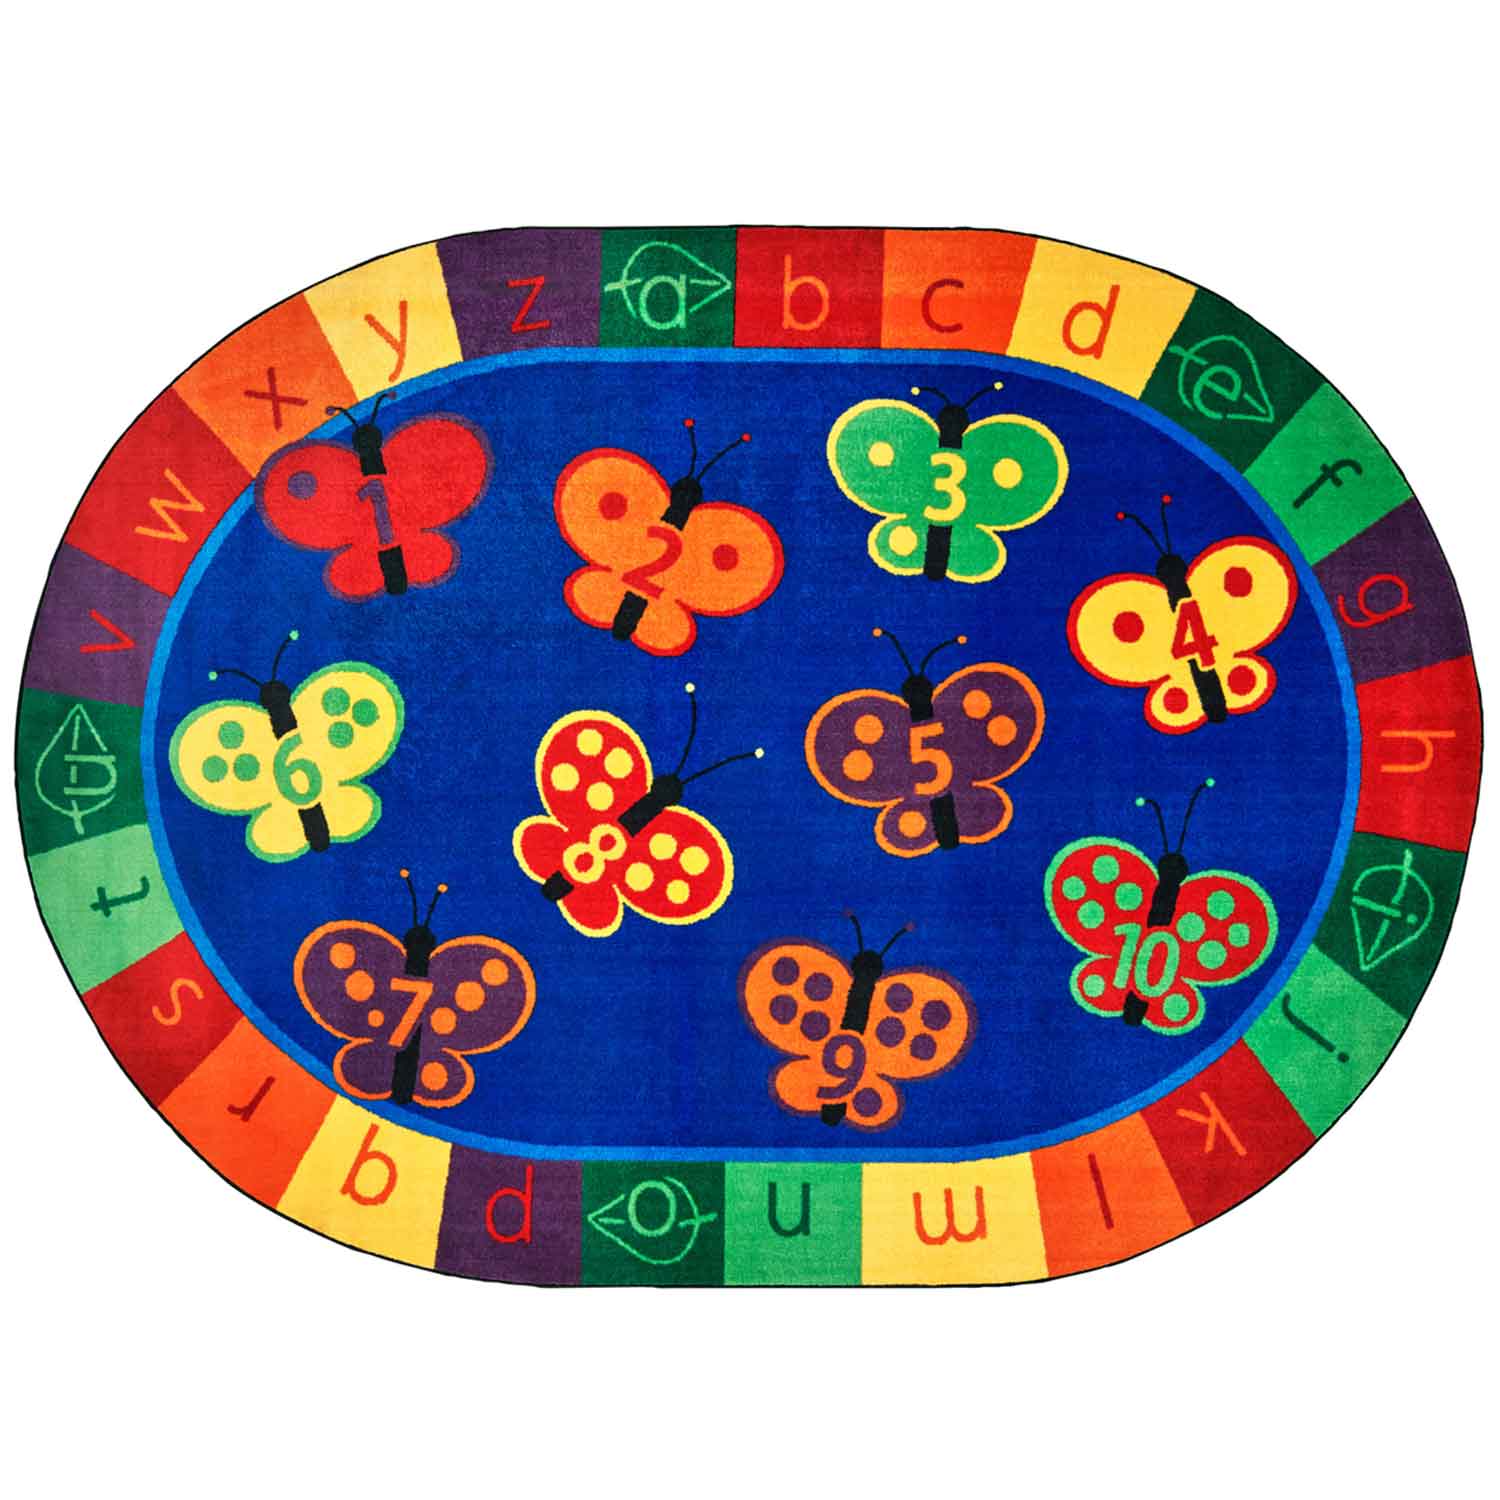 KIDSoft™ 123 ABC Butterfly Classroom Rug, Oval 8' x 12'